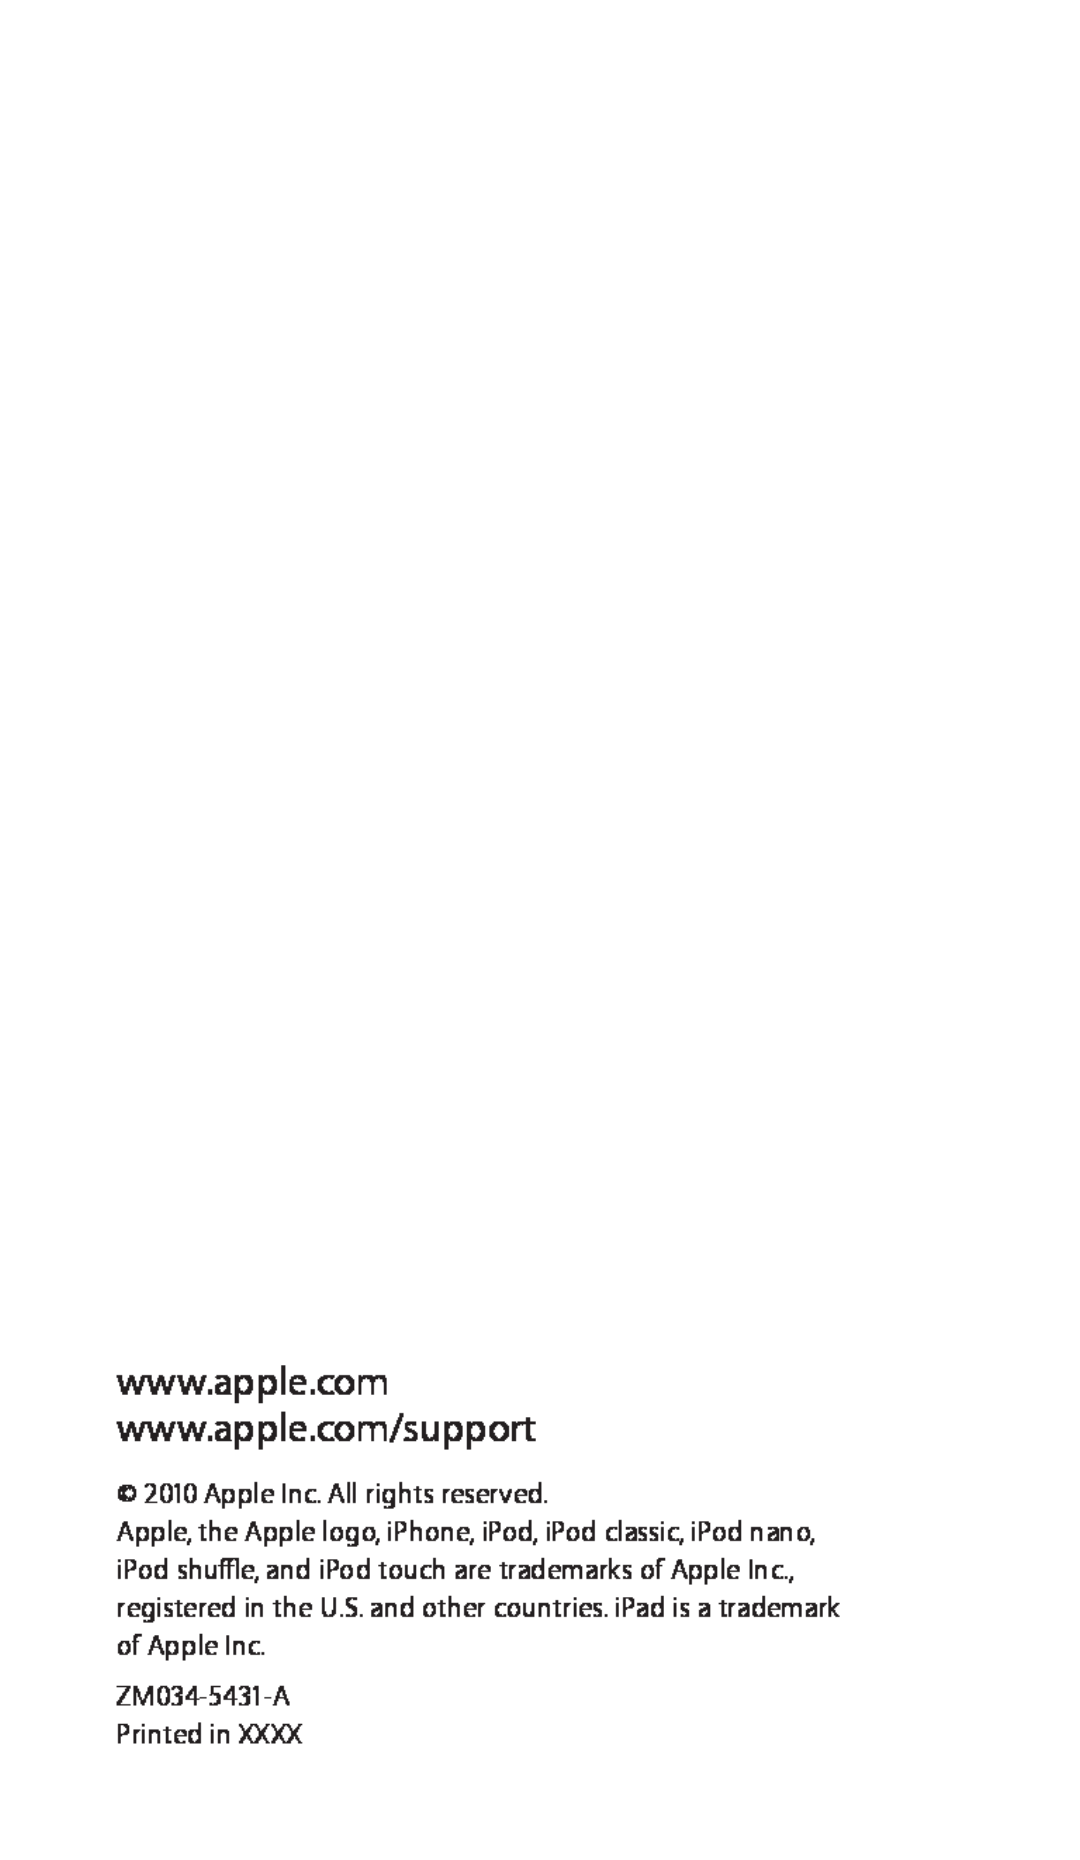 Apple ZM034-5431-A manual Apple Inc. All rights reserved 